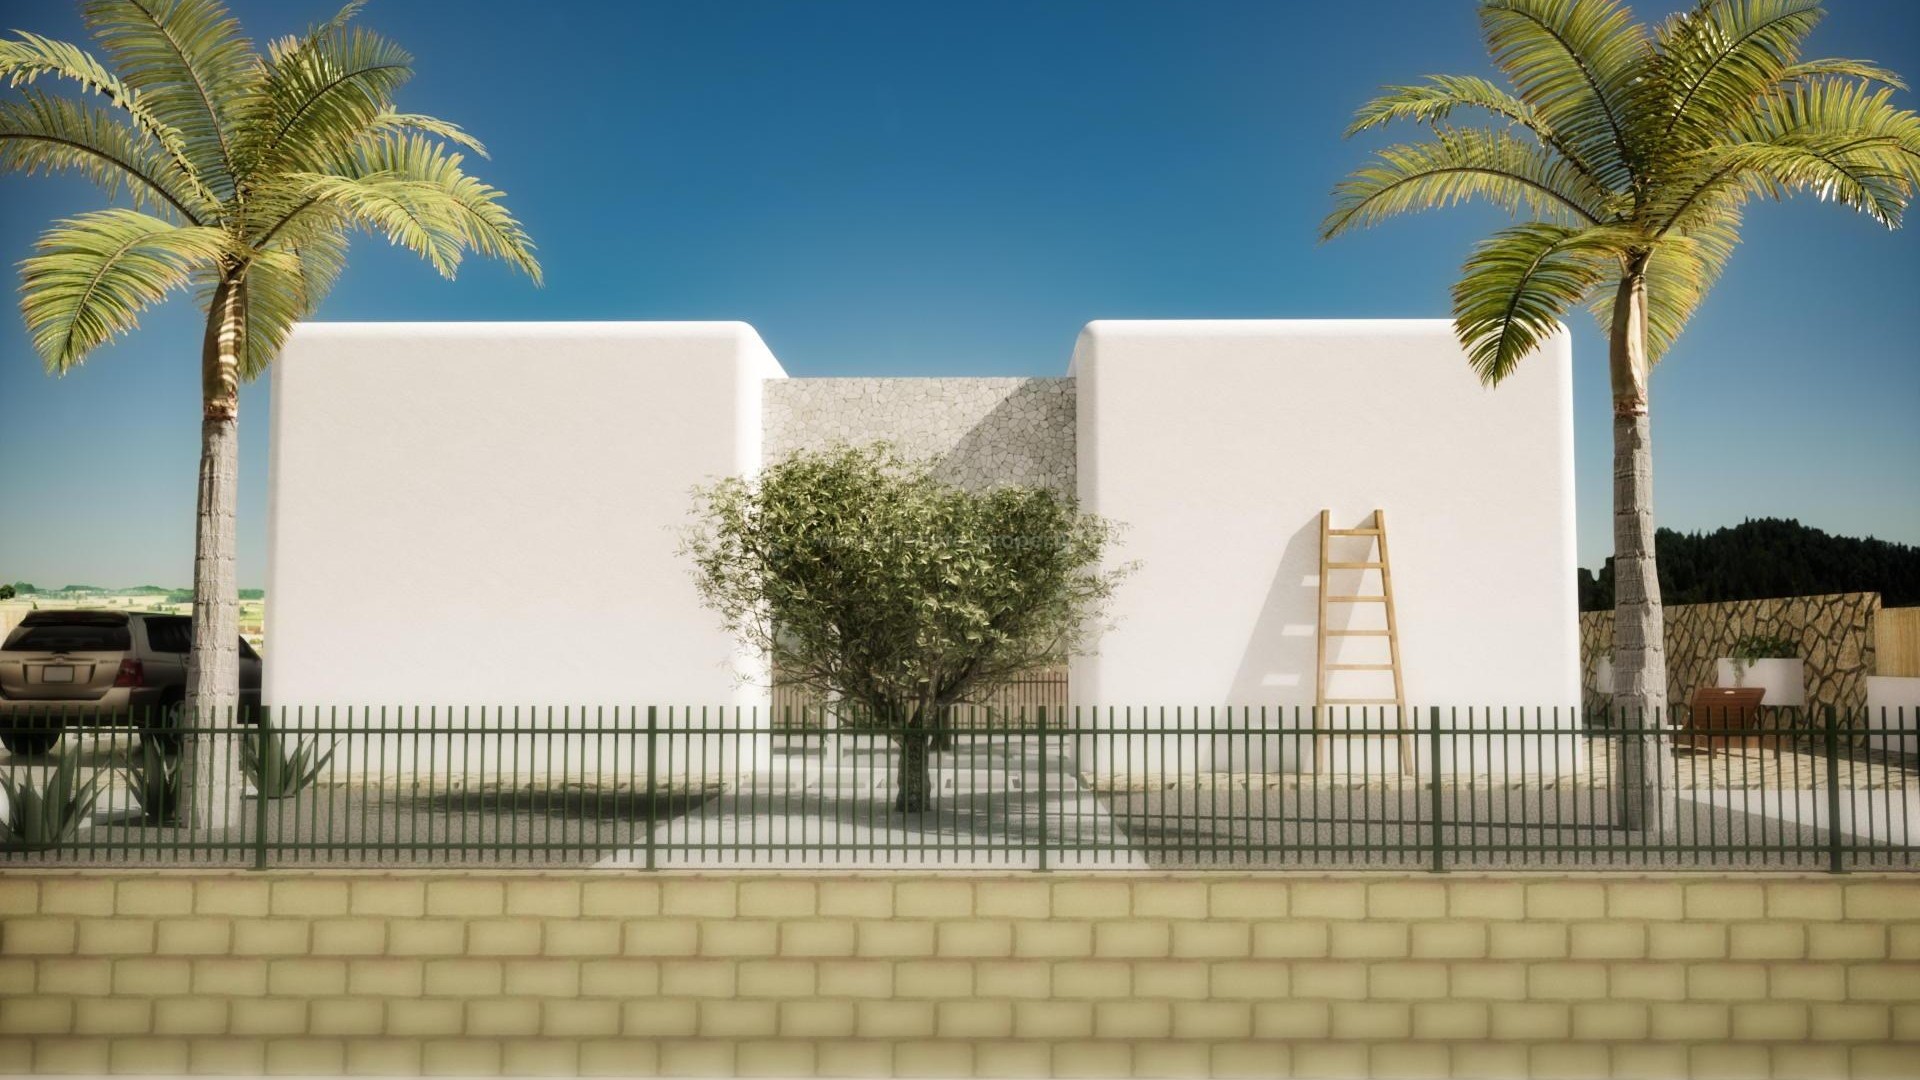 Alfaz del Pi with new Ibiza style villas/houses, 3 bedrooms, 2 bathrooms, large outside pool area. The master bedroom has a walk-in closet and a private bathroom